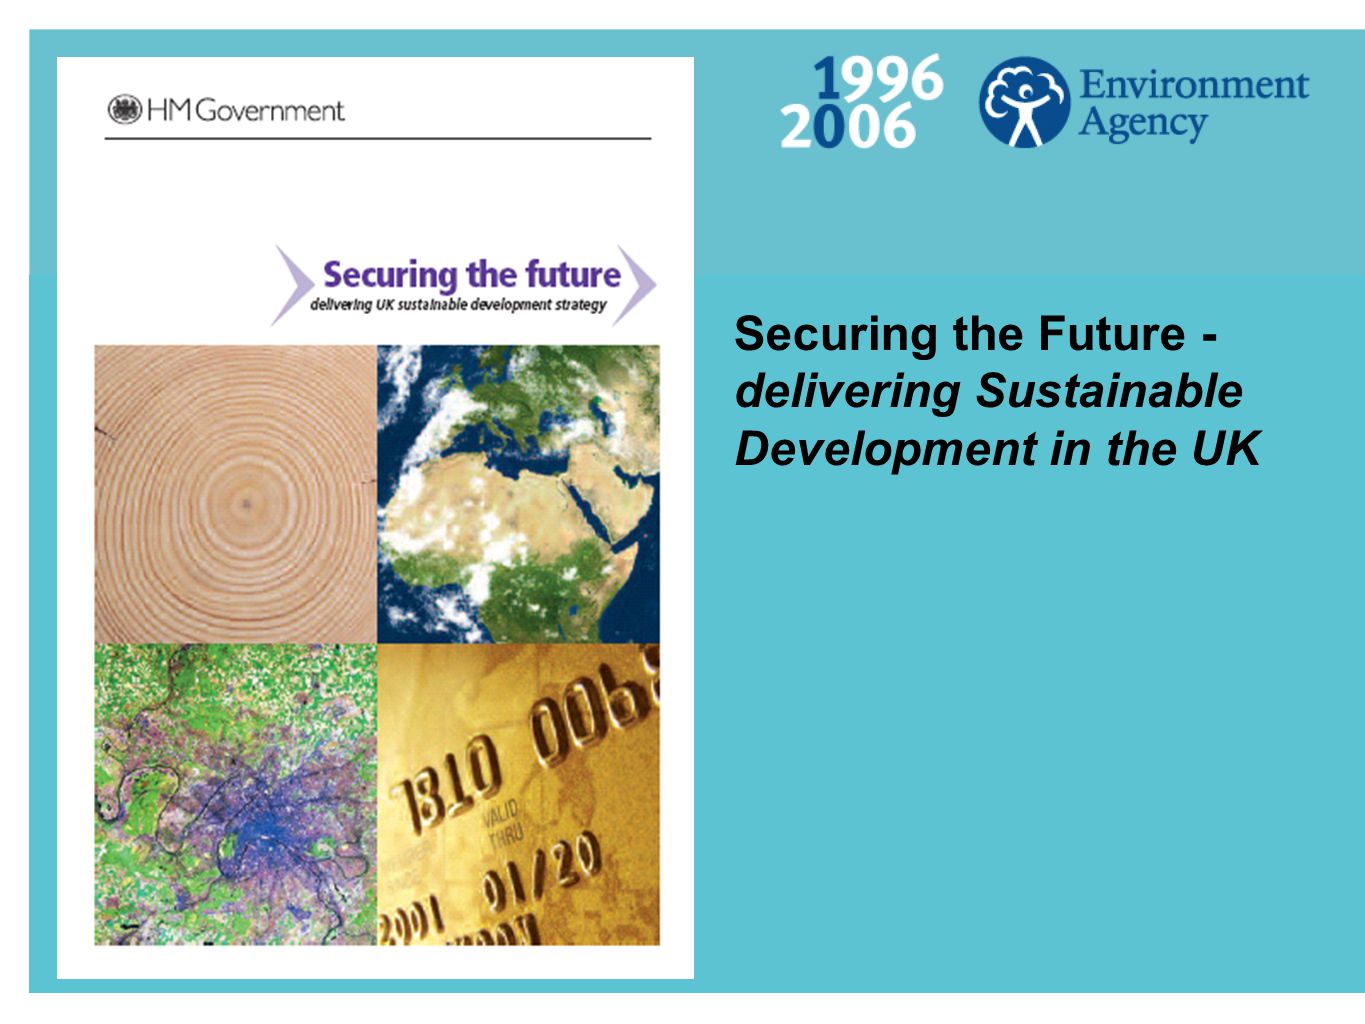 Securing the Future - delivering Sustainable Development in the UK